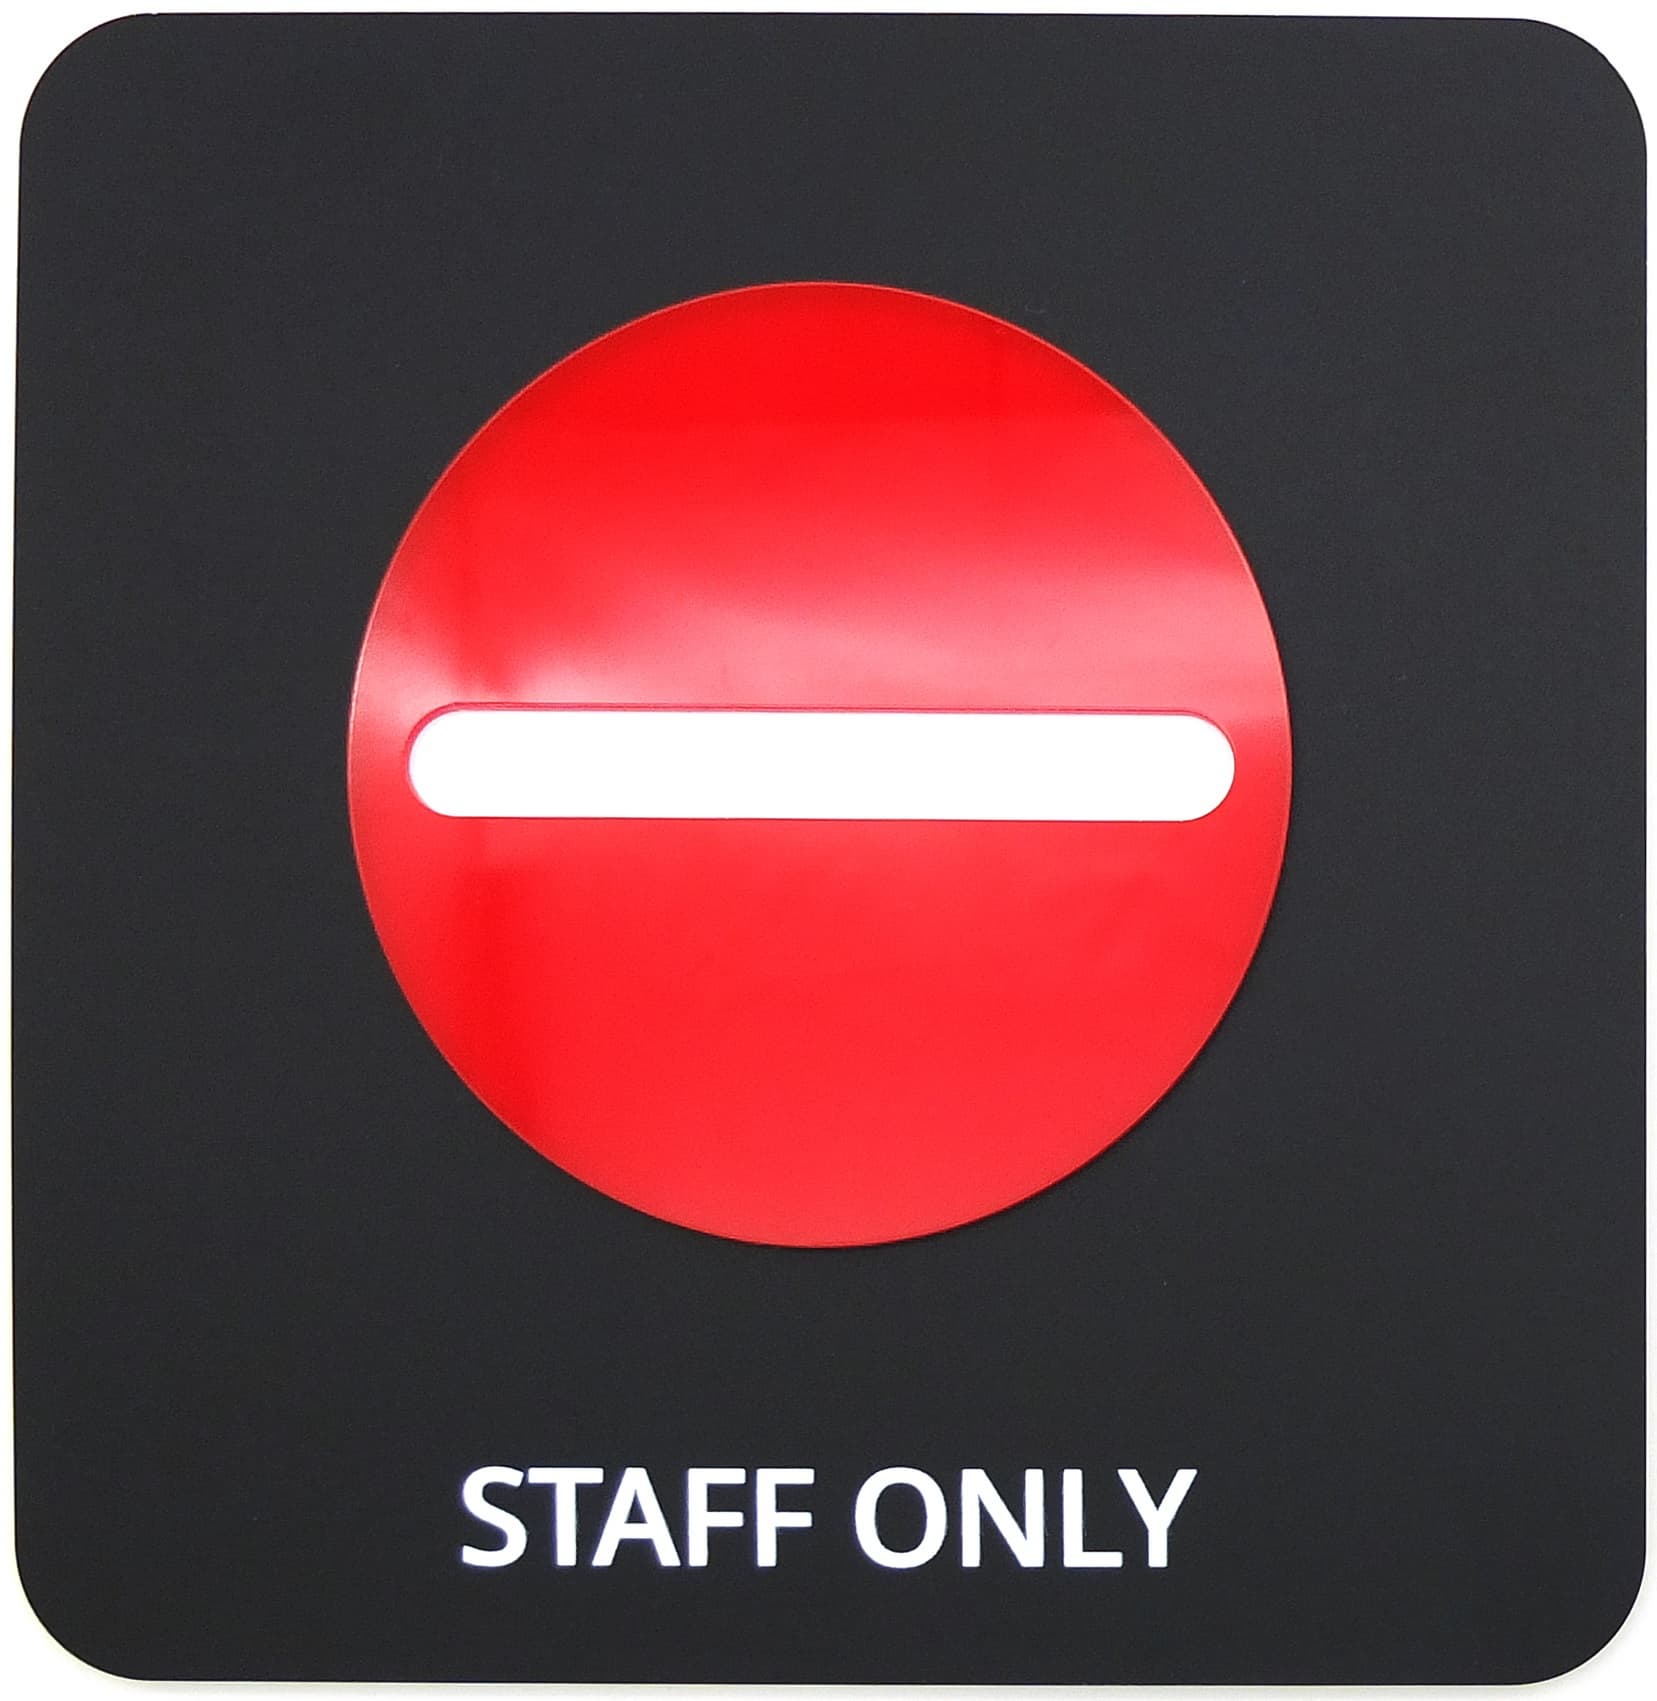 Staff only acrylic signage